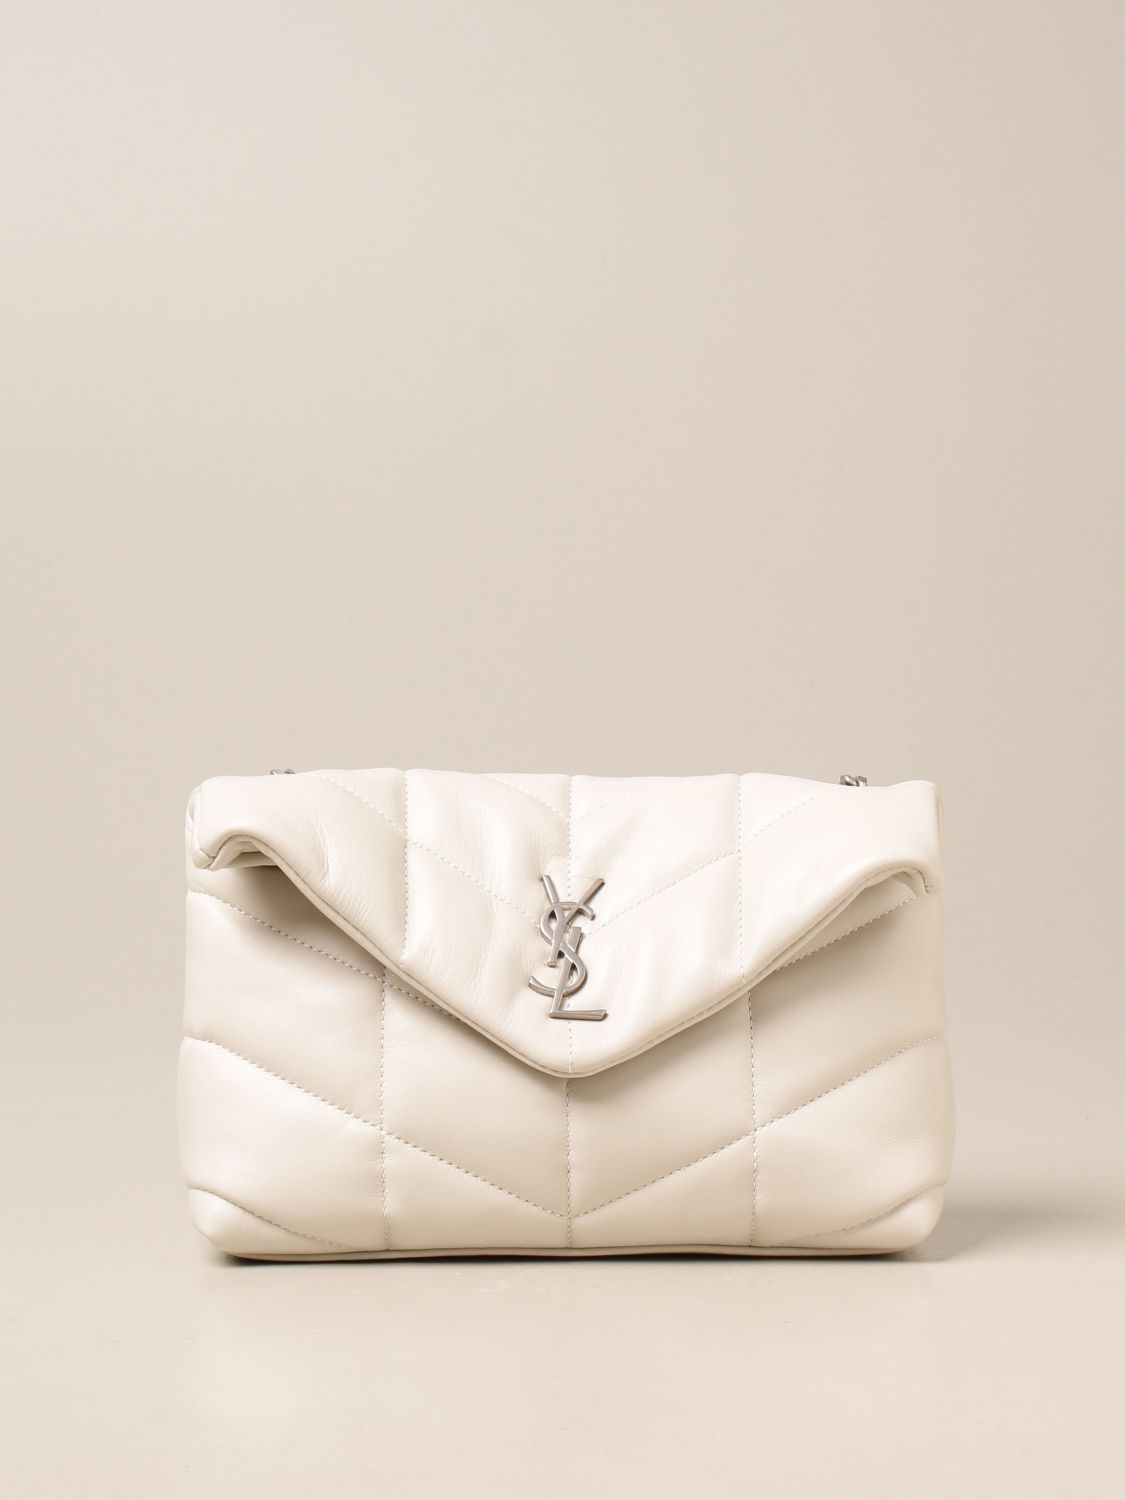 SAINT LAURENT: Toy loulou puffer bag in quilted leather - Cream